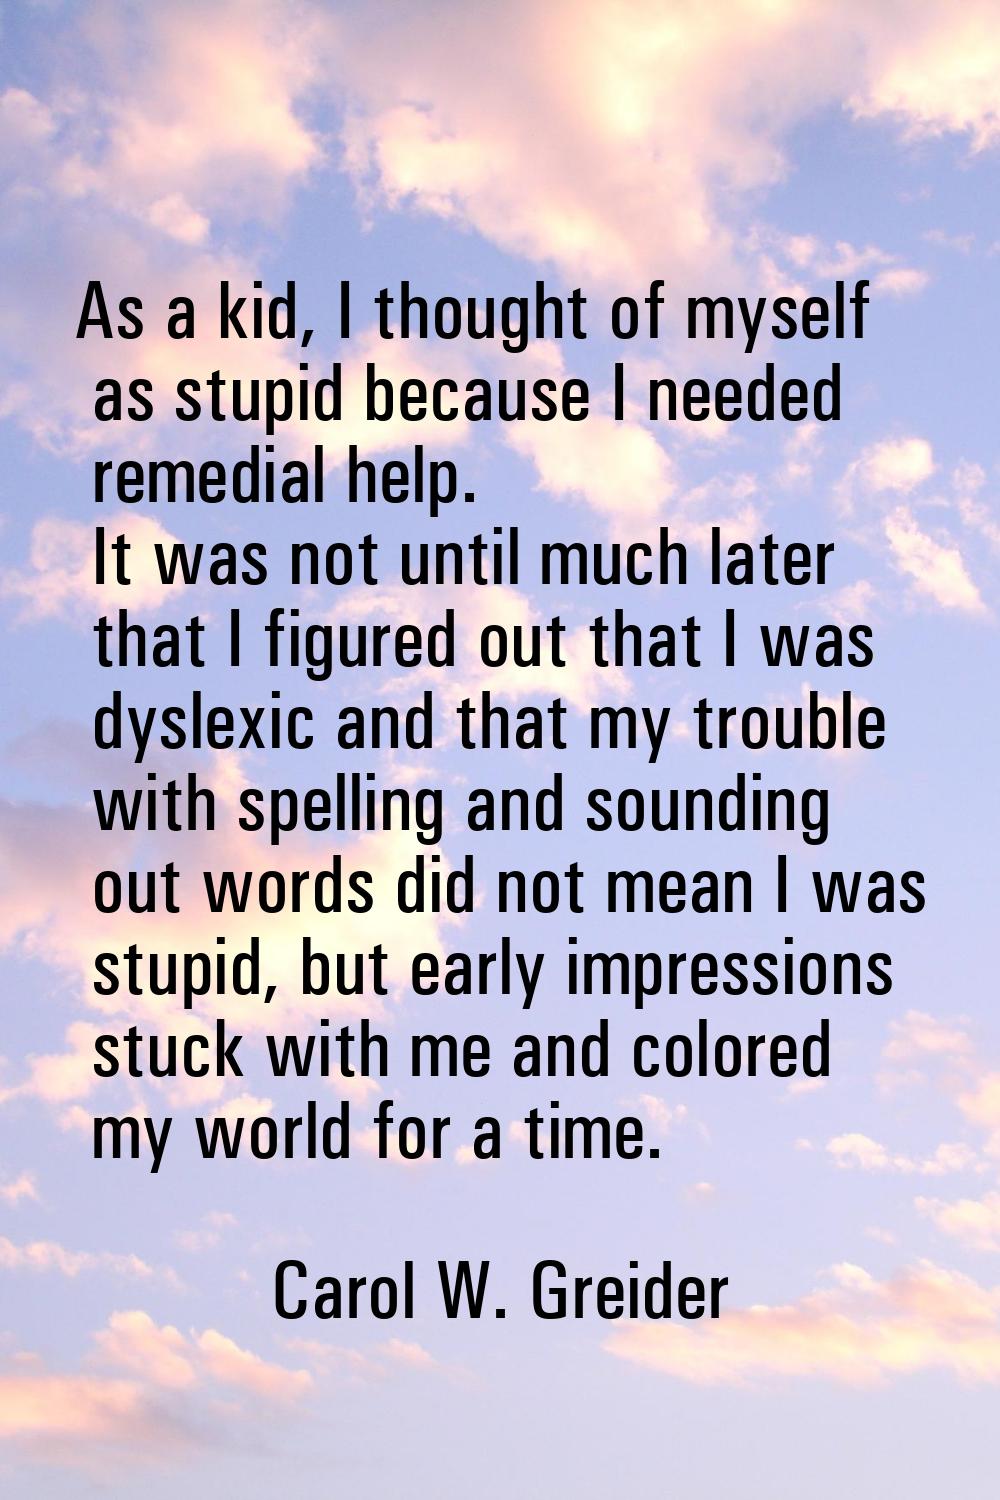 As a kid, I thought of myself as stupid because I needed remedial help. It was not until much later